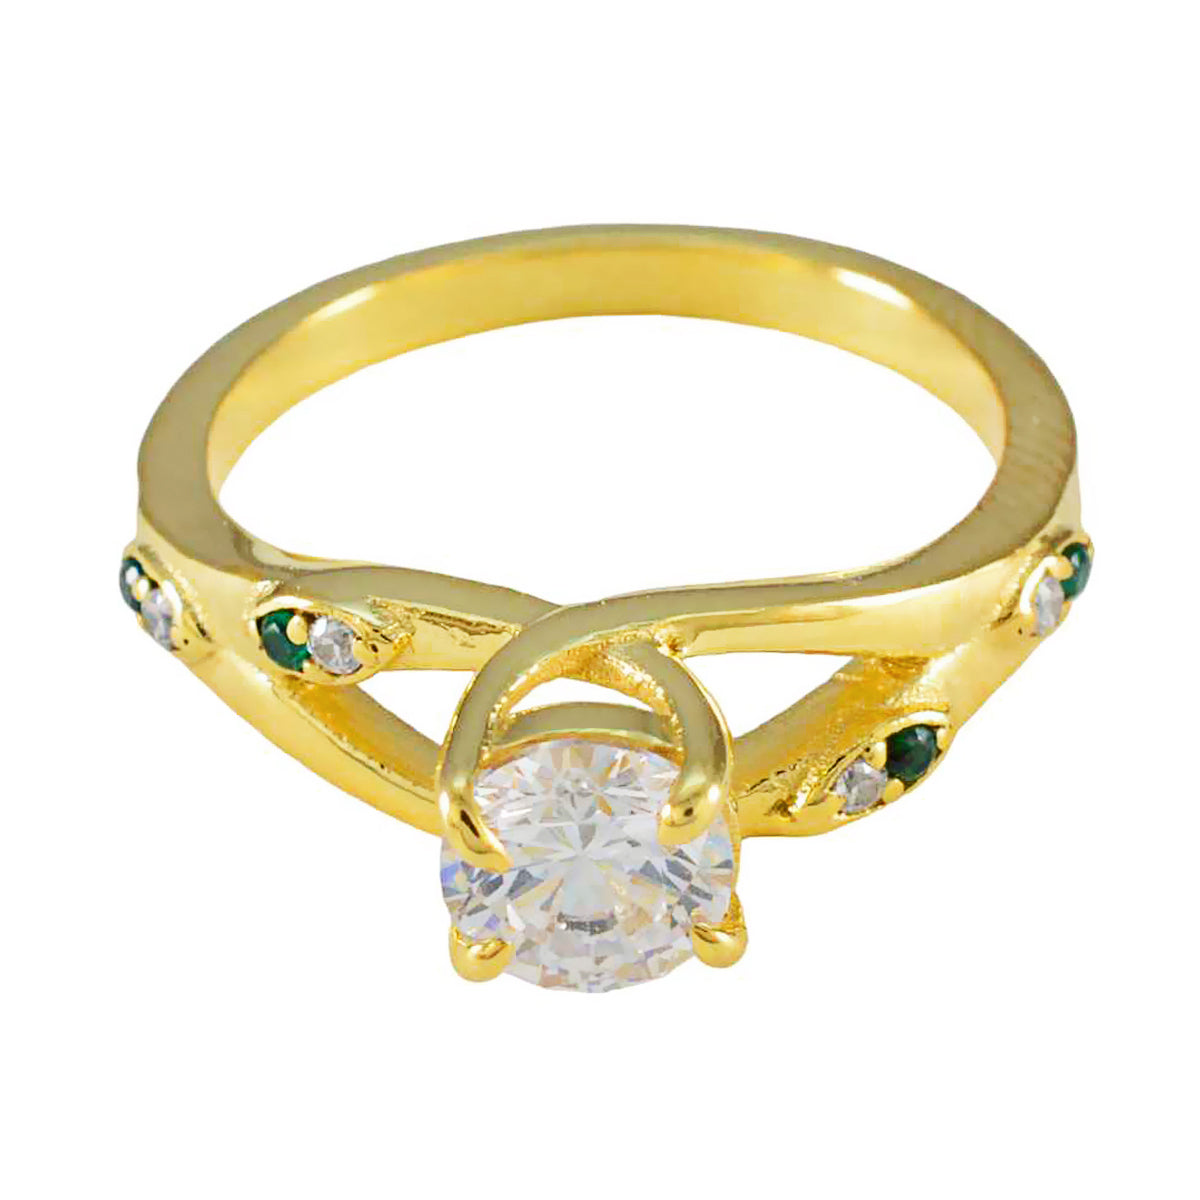 Riyo Jewelry Silver Ring With Yellow Gold Plating Emerald CZ Stone Round Shape Prong Setting Bridal Jewelry Halloween Ring